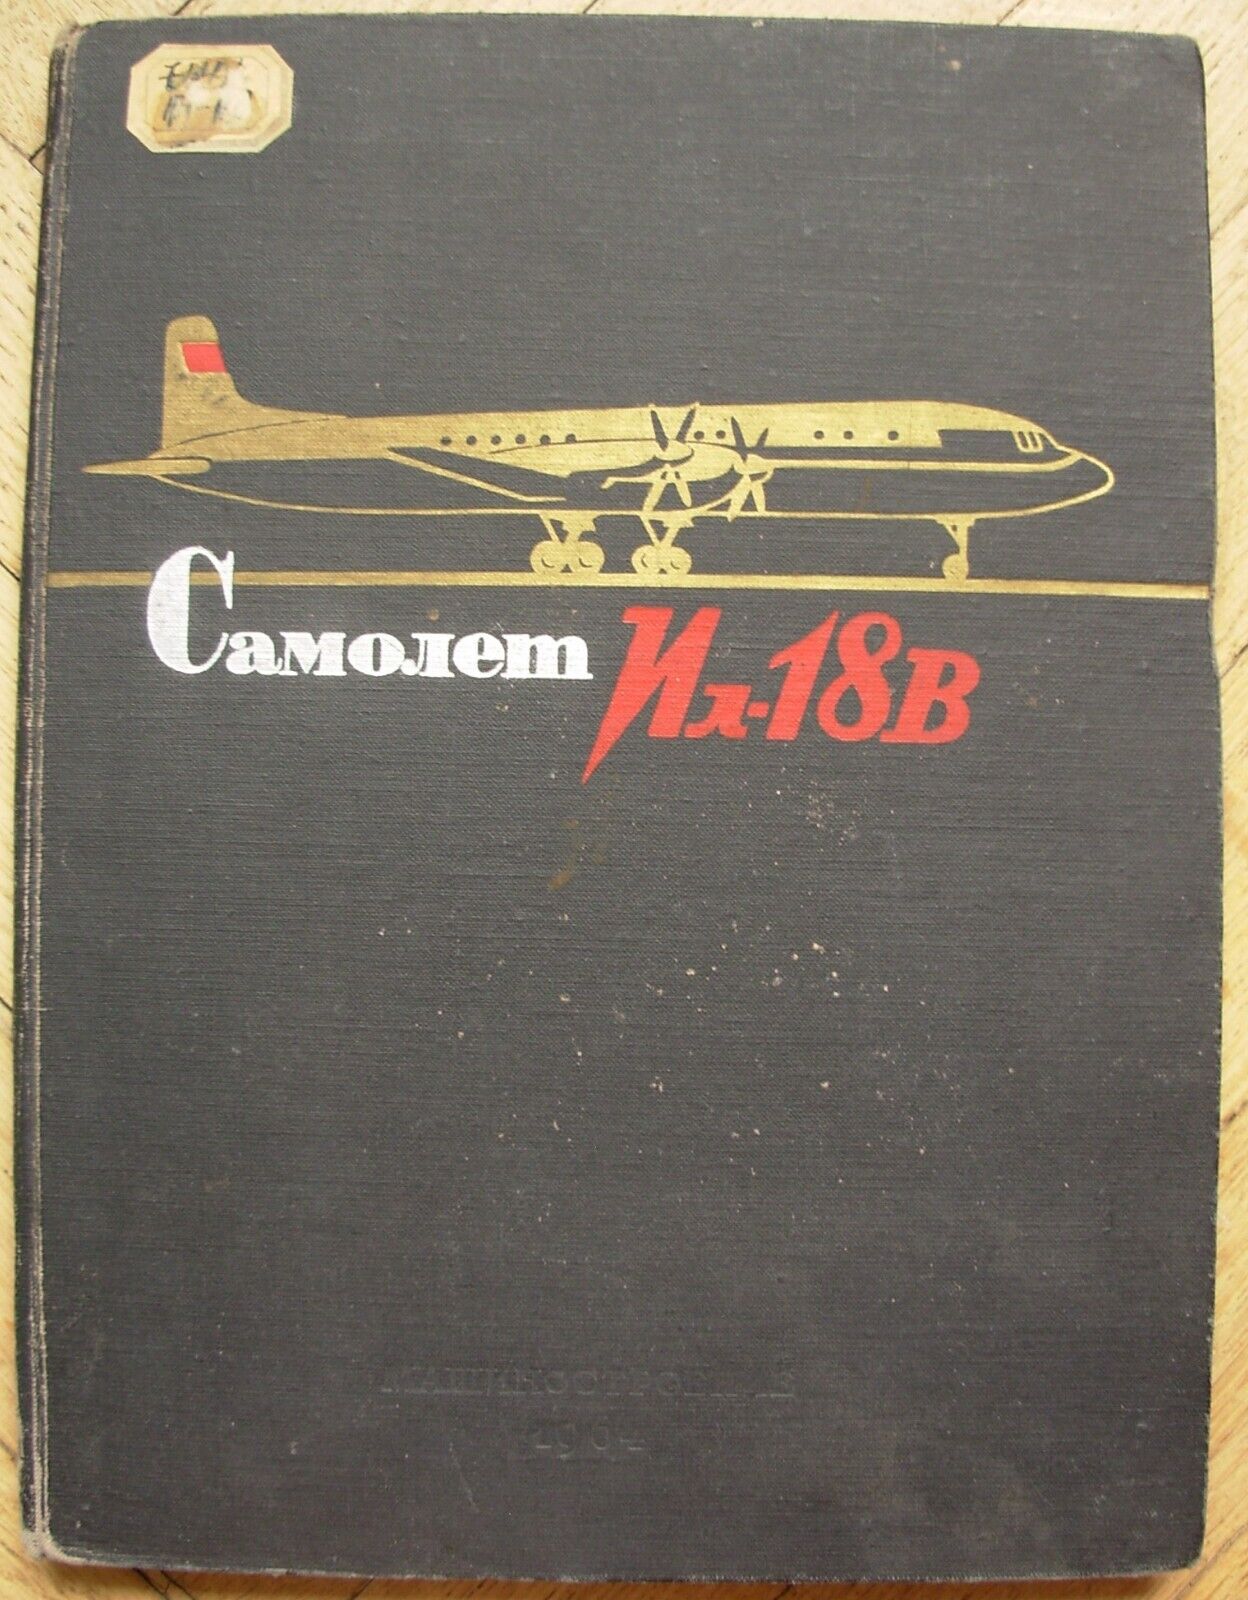 1964 Airliner IL 18 18B Aero engine Technical instruction Soviet manual aircraft